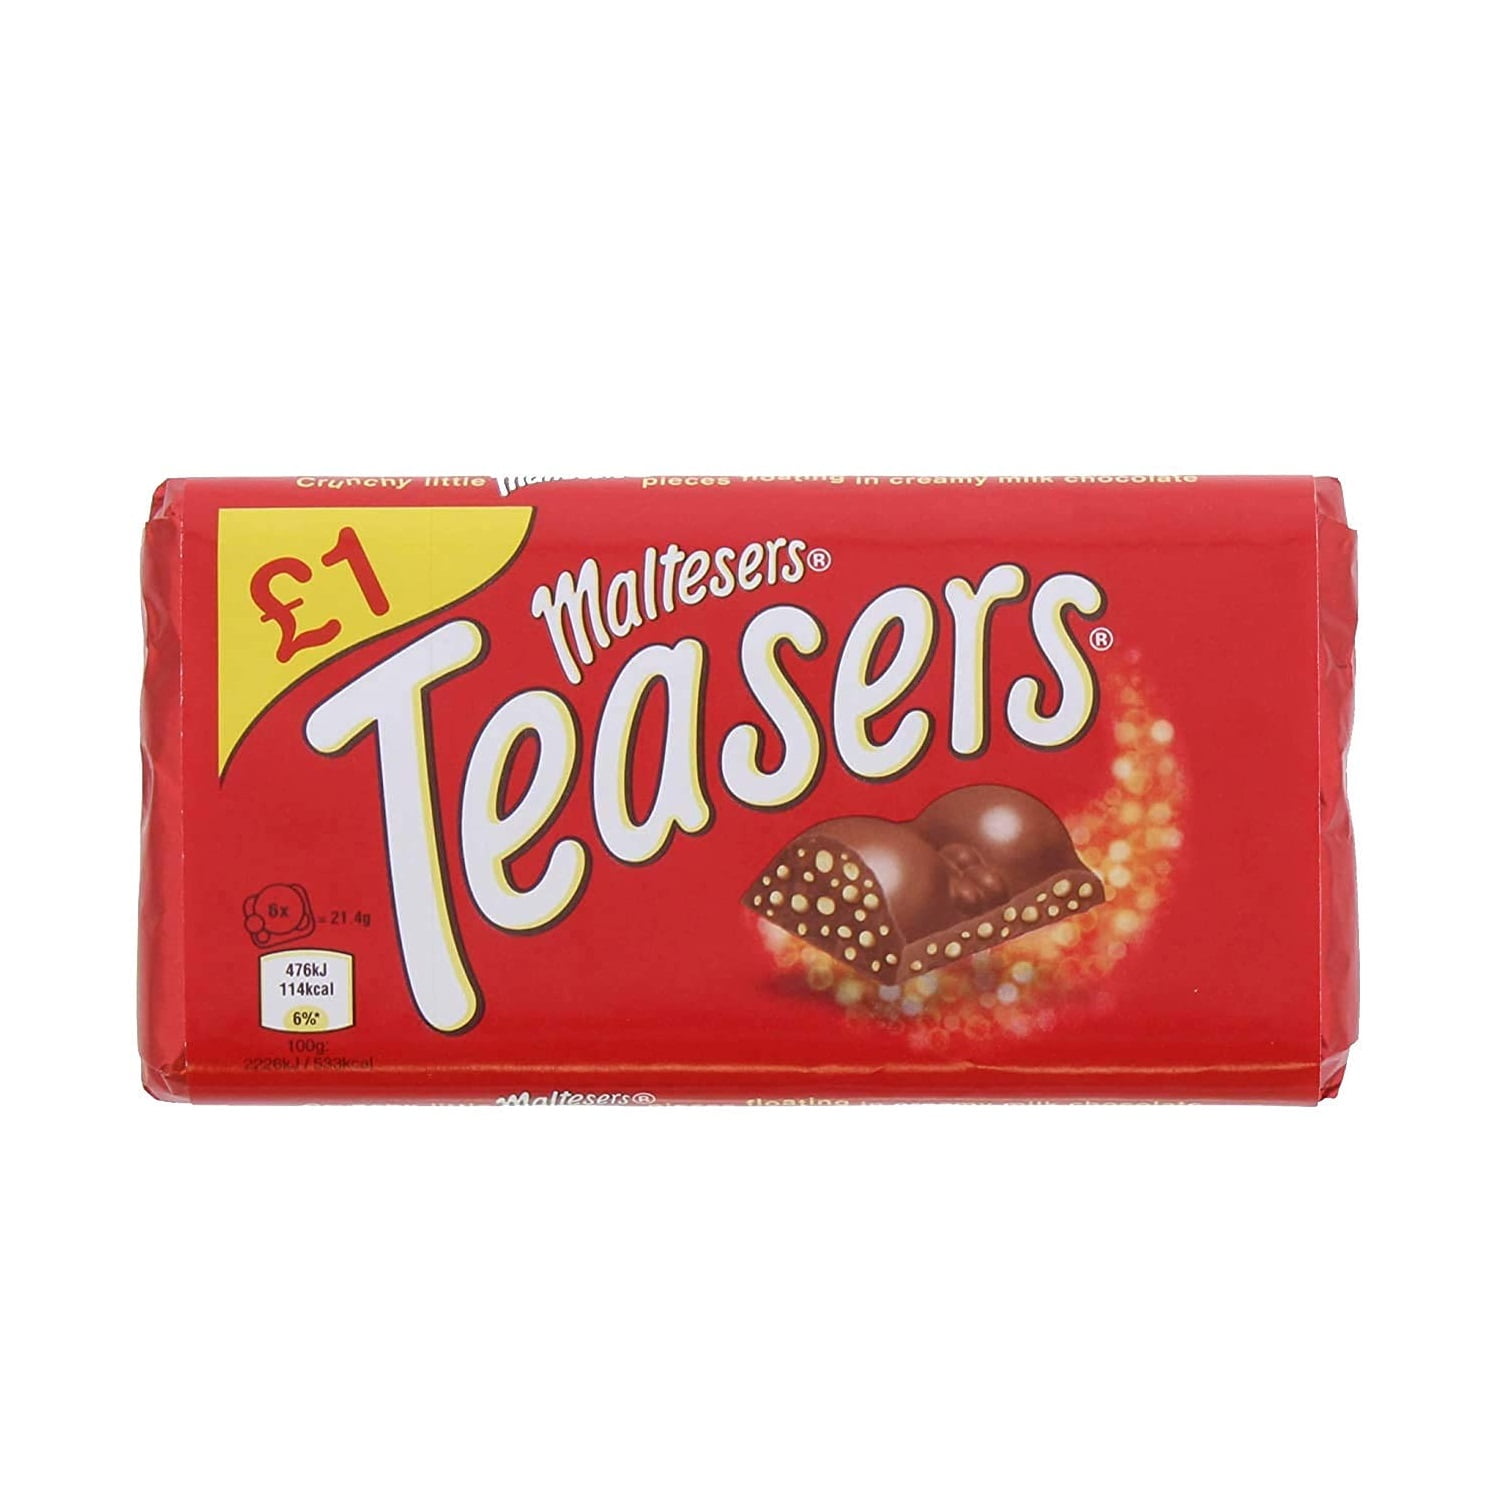 Present Gift for mum Malteser teasers small chocolate Sweet Tree 